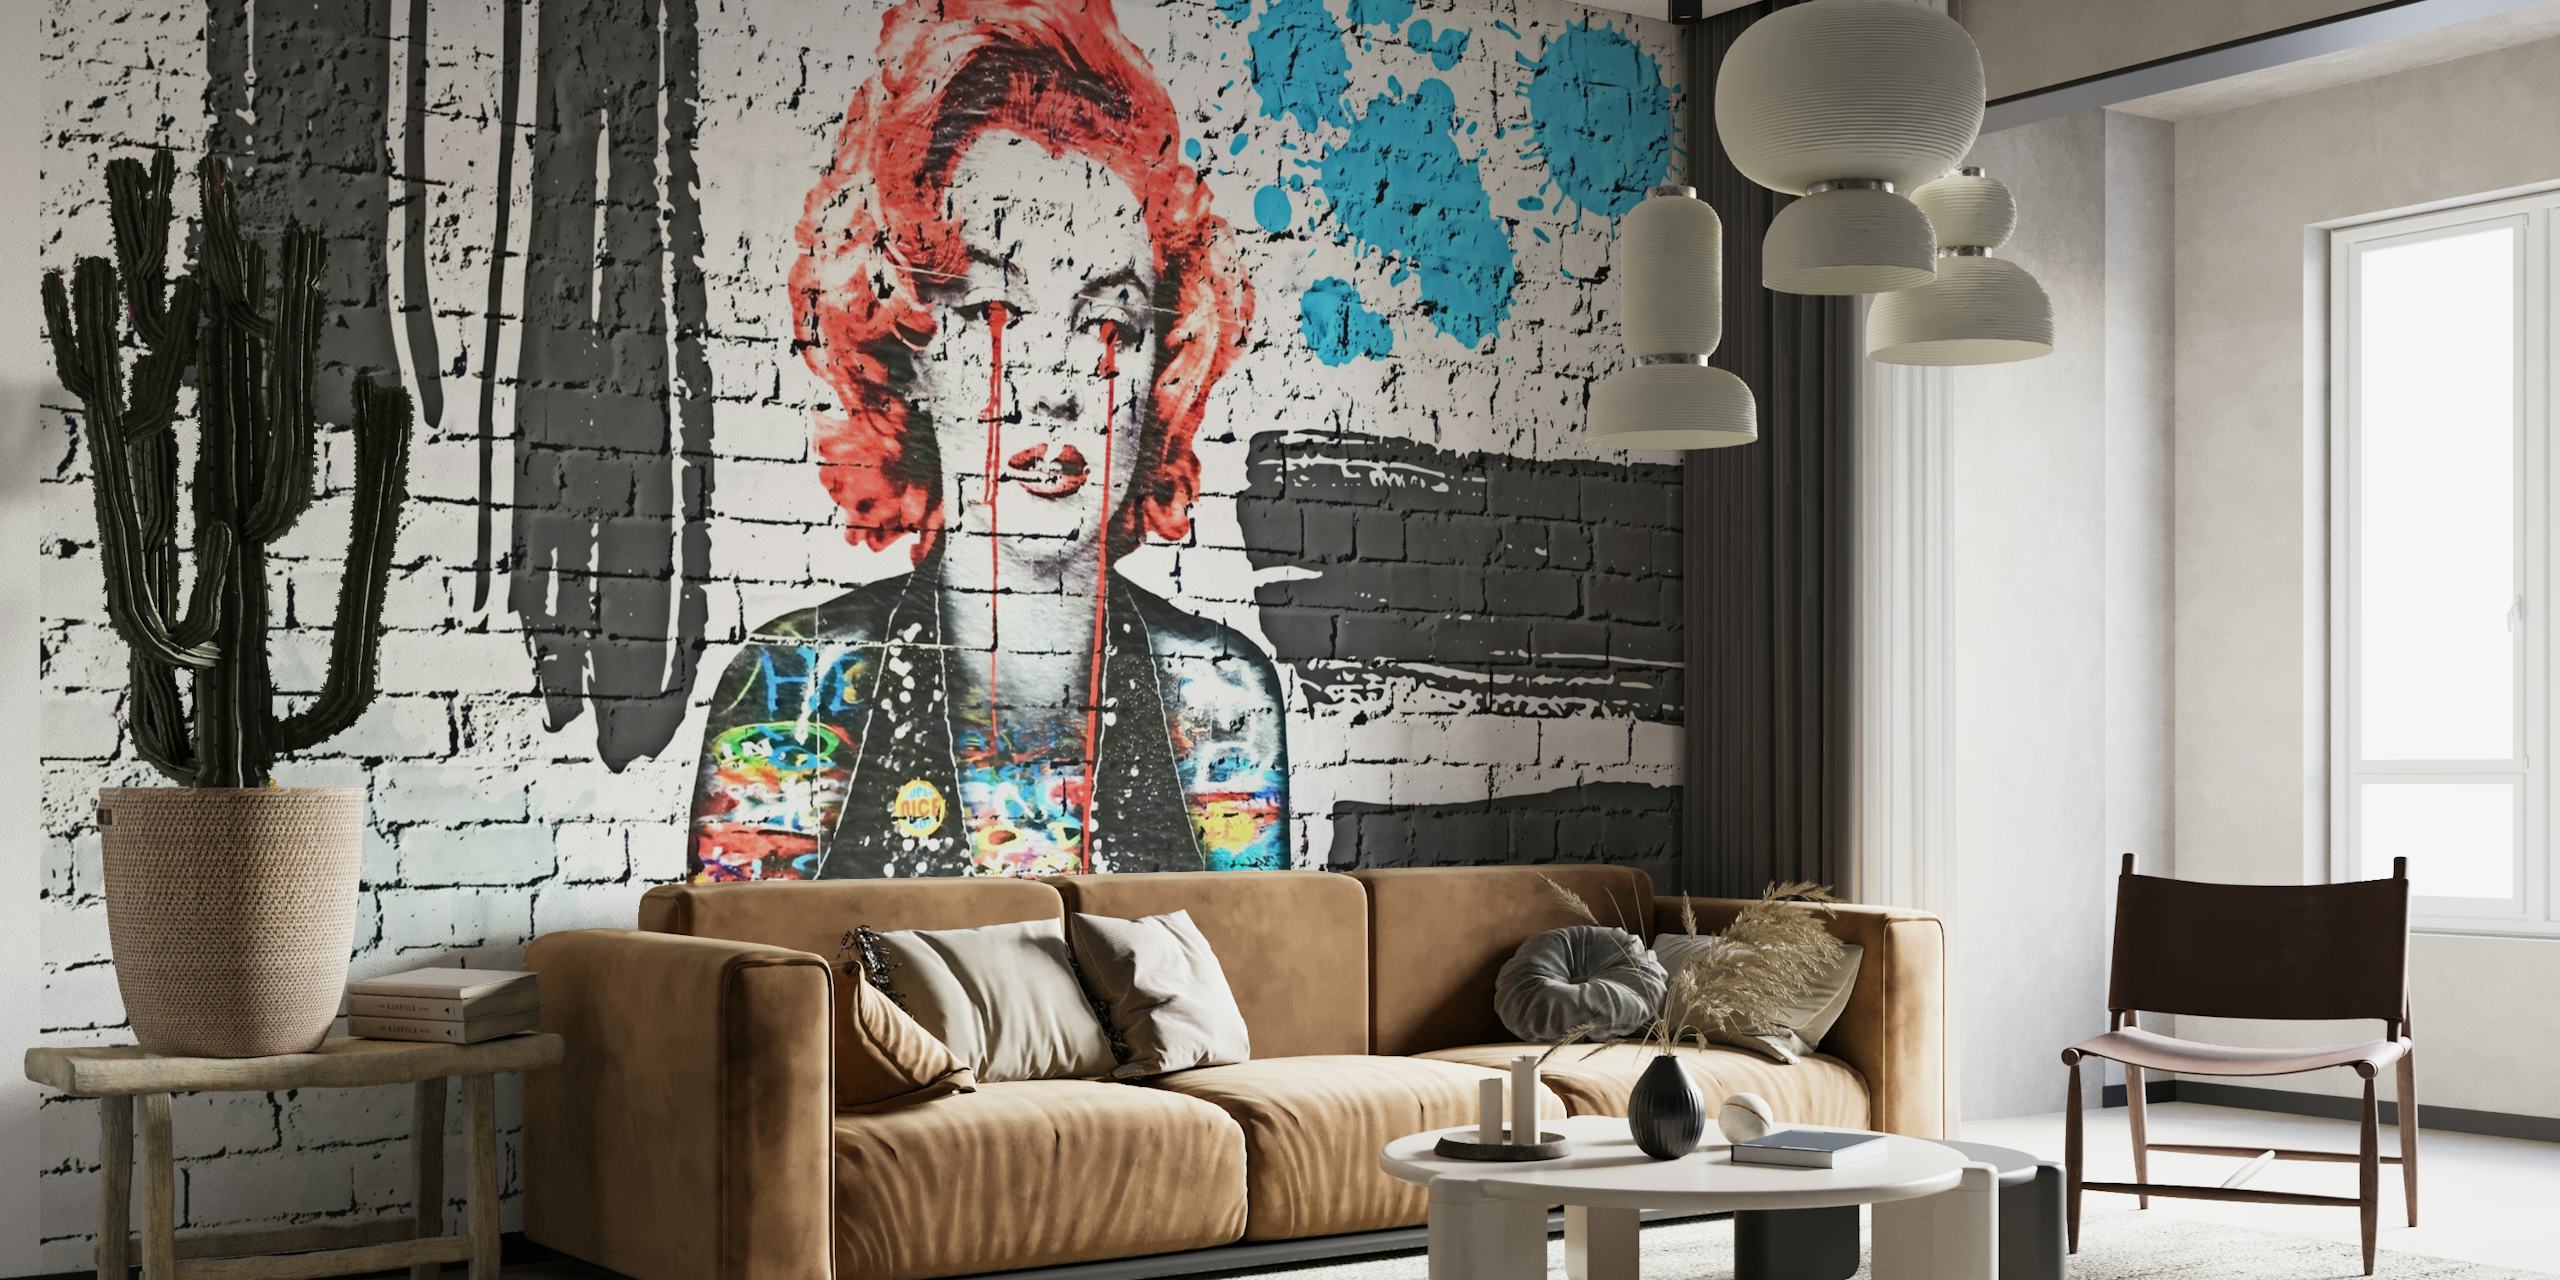 Graffiti-style wall mural with vibrant pop art elements on a brick background for modern interiors.